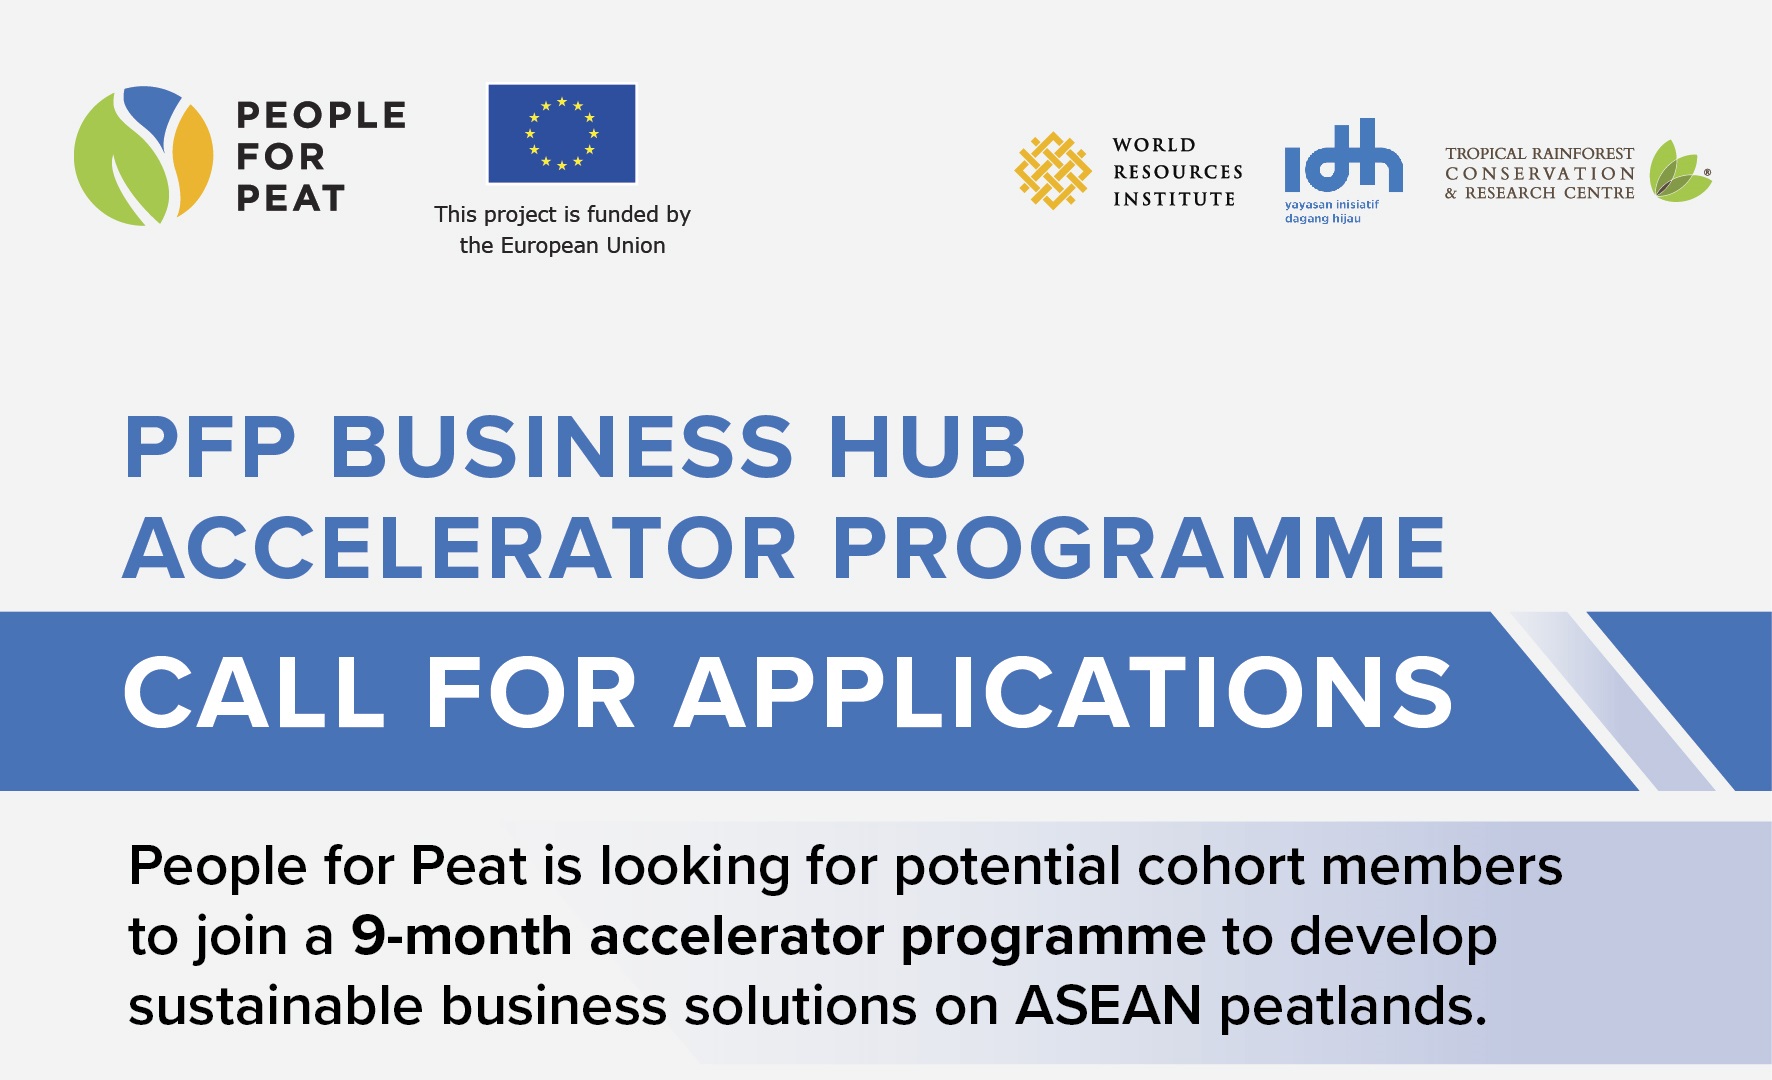 People For Peat (PFP) Business Hub Accelerator Program 2021 [ASEAN Countries only]